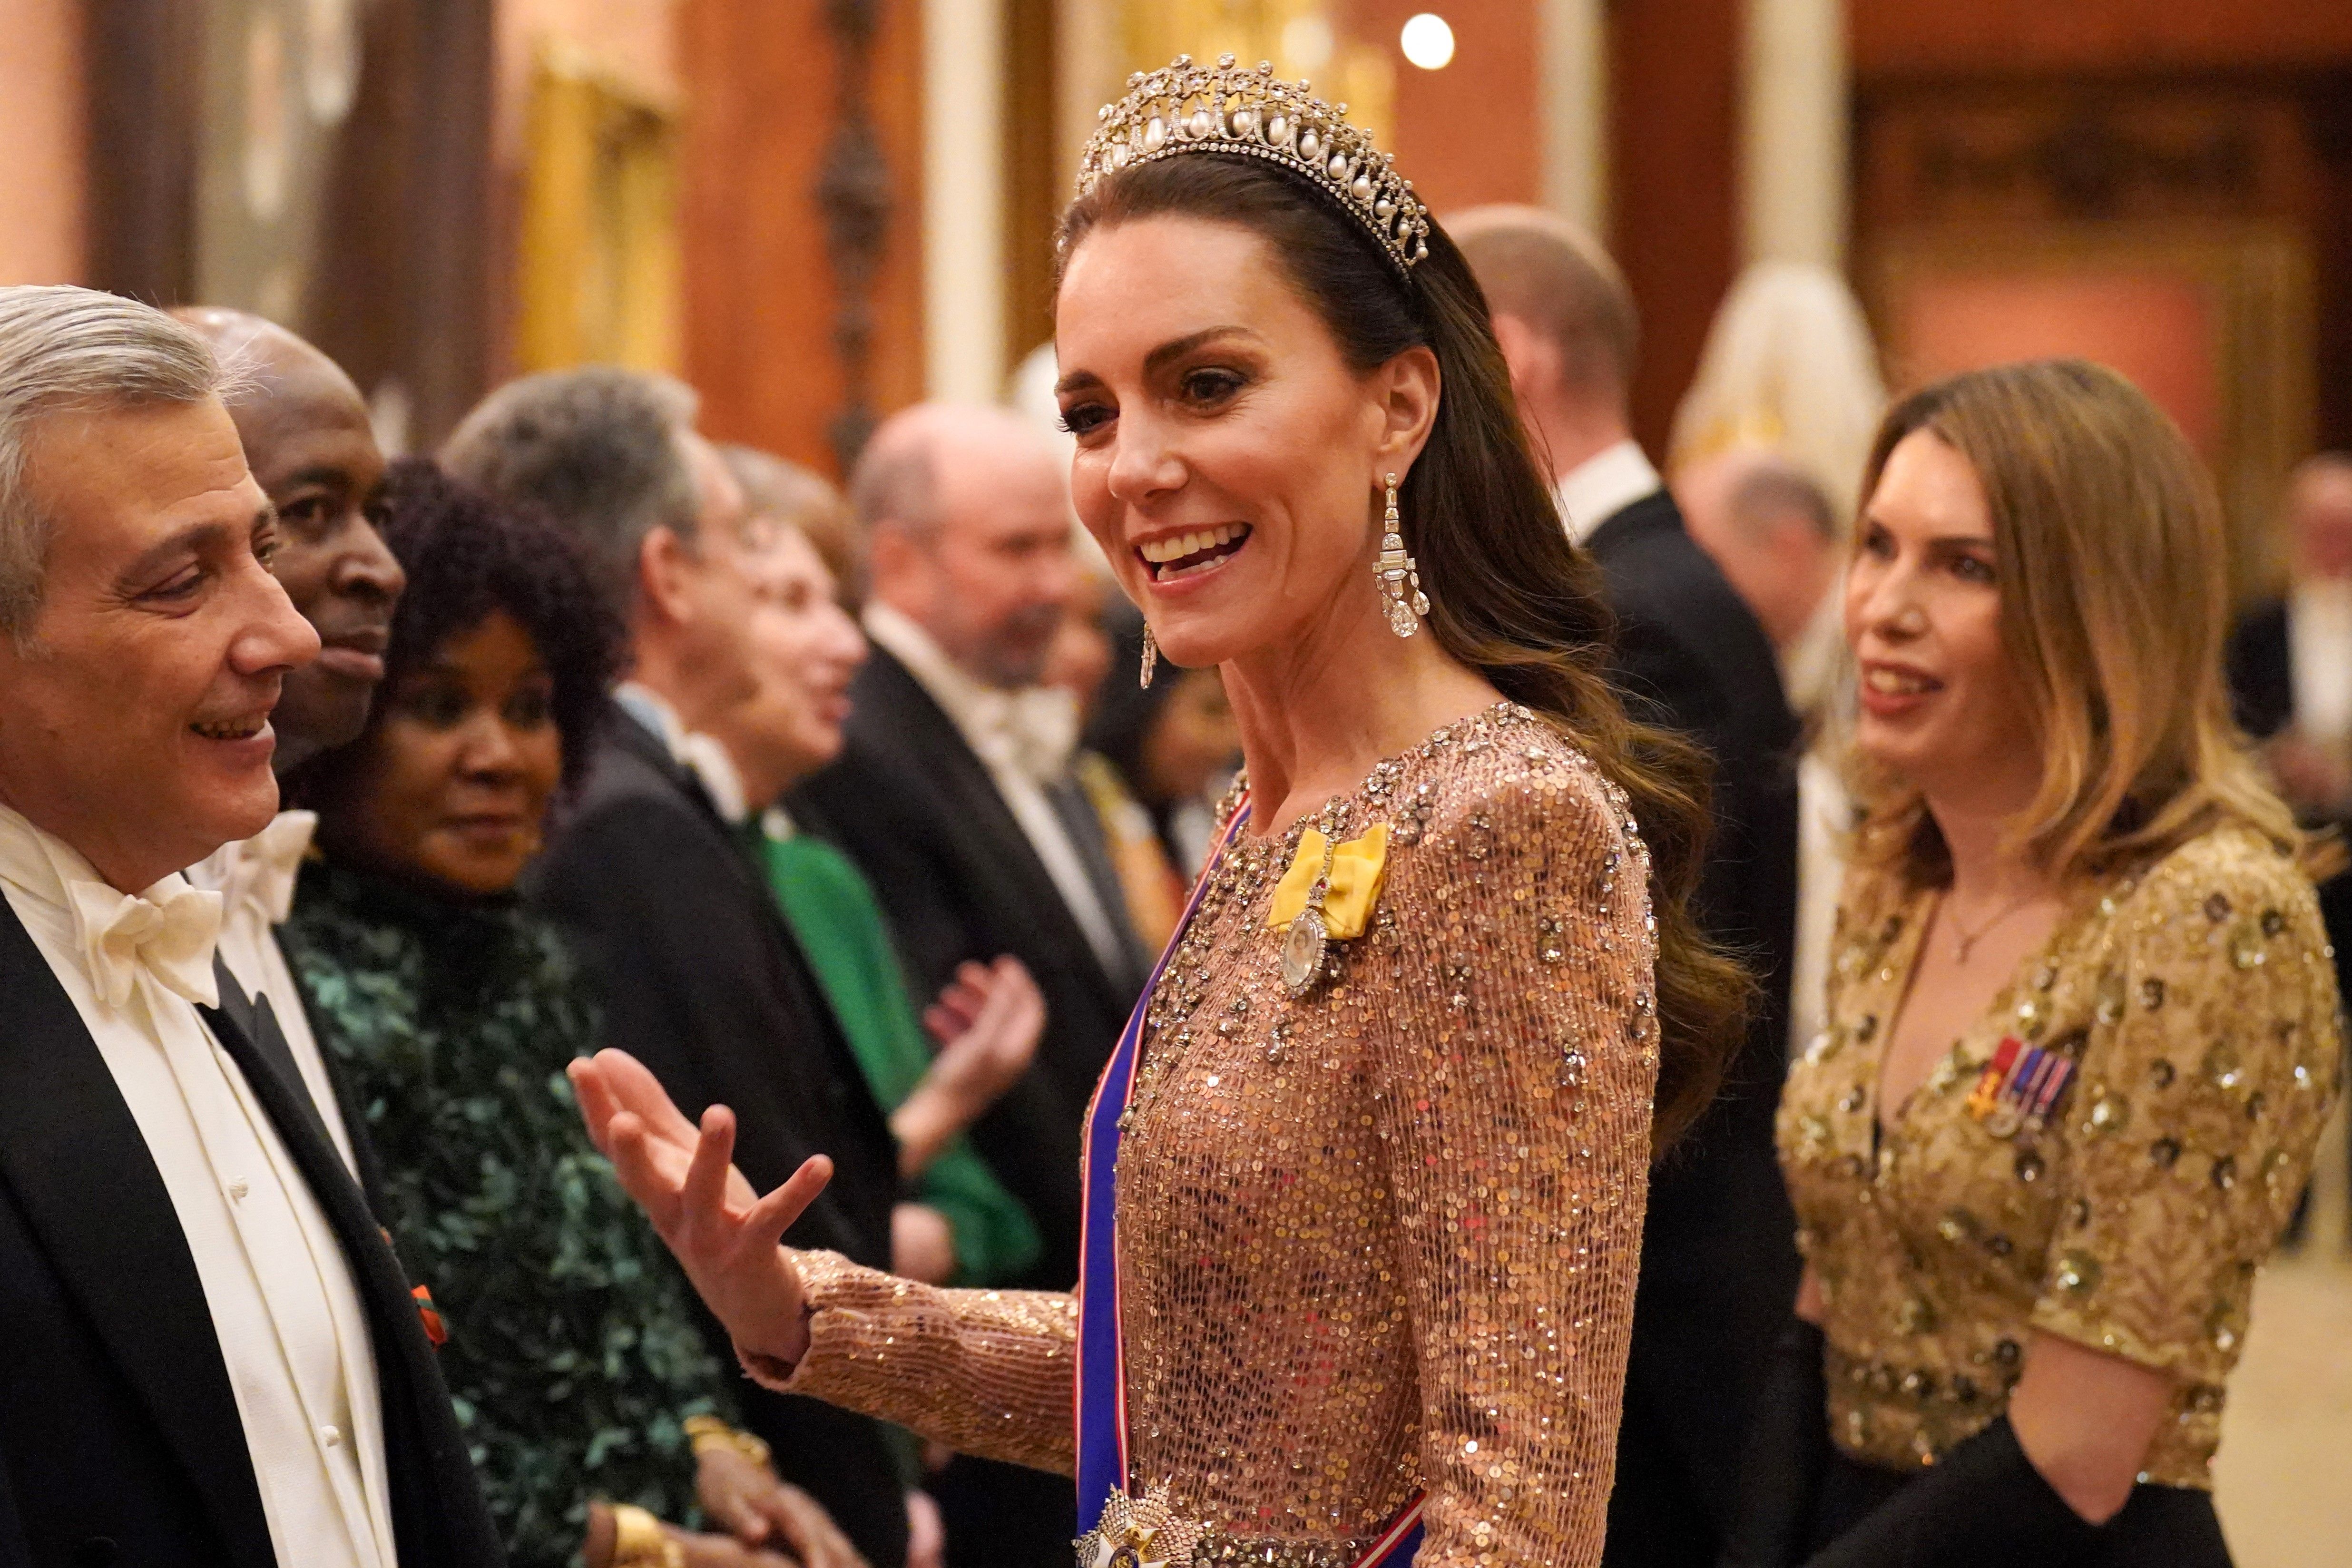 Kate Middleton Looked Regal in Her First Tiara as the Princess of Wales